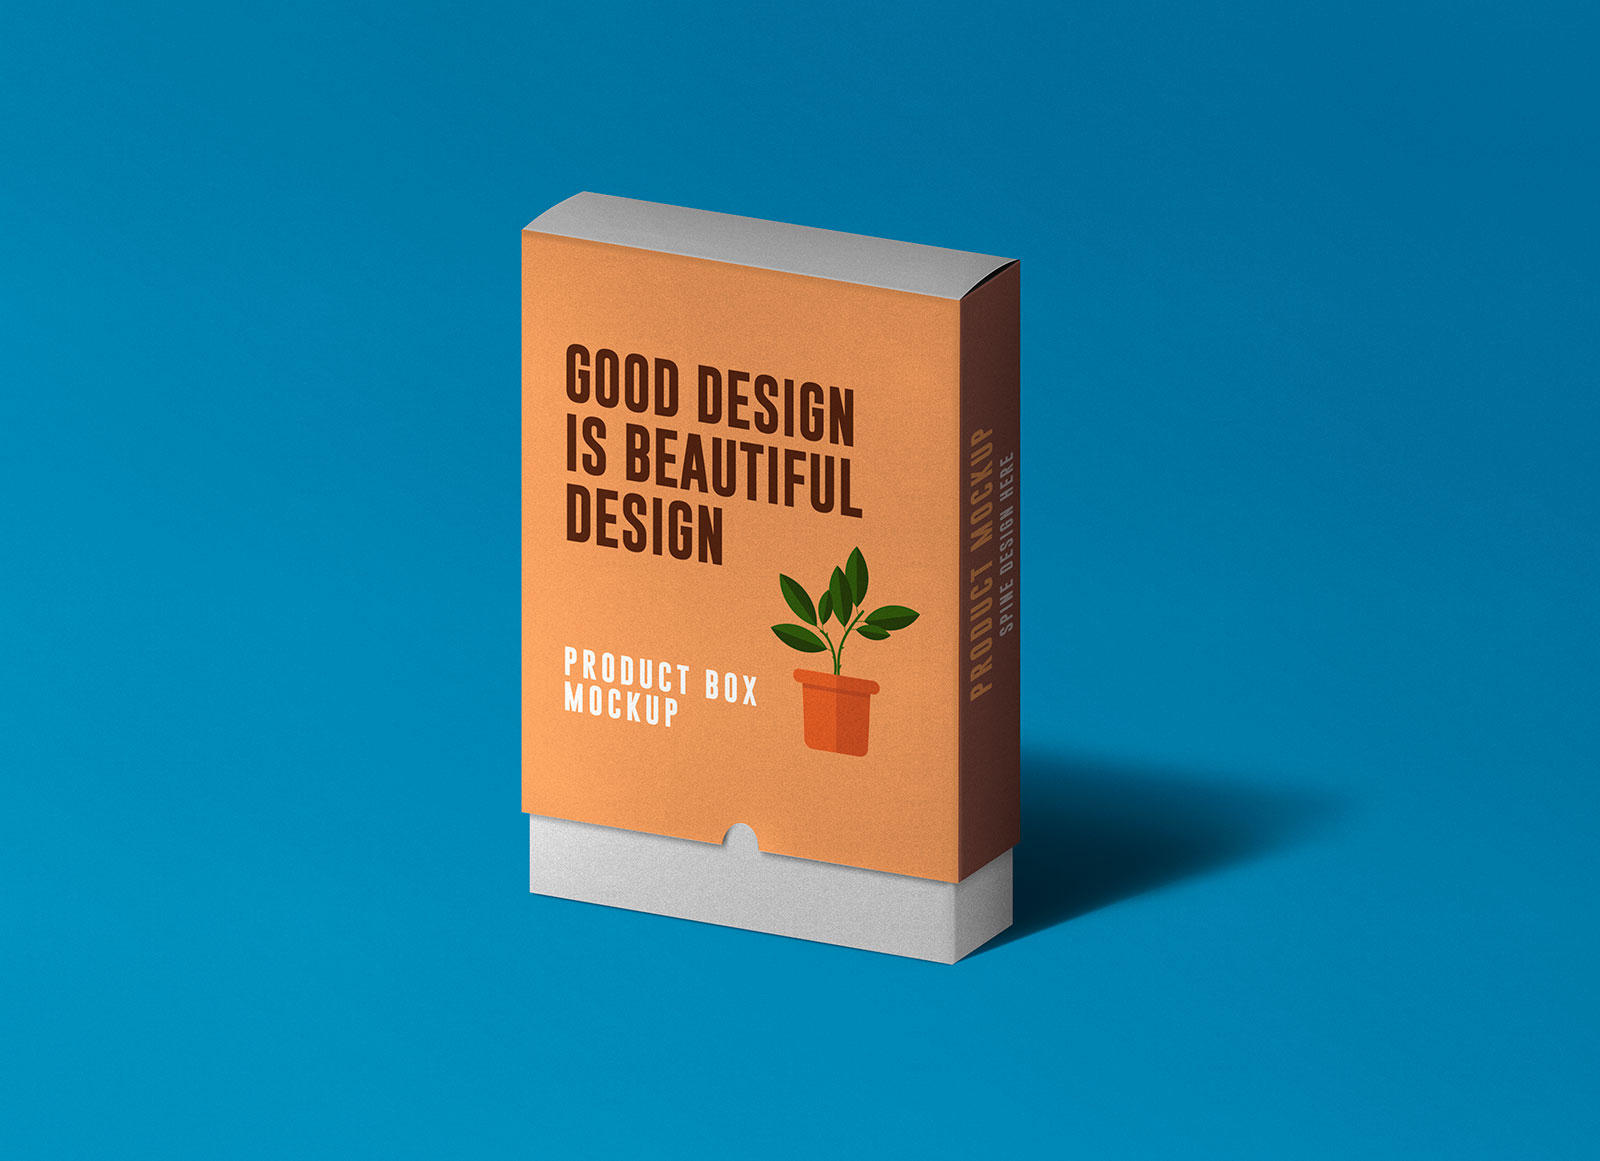 Free-Standing-Product-Box-Packaging-Mockup-PSD